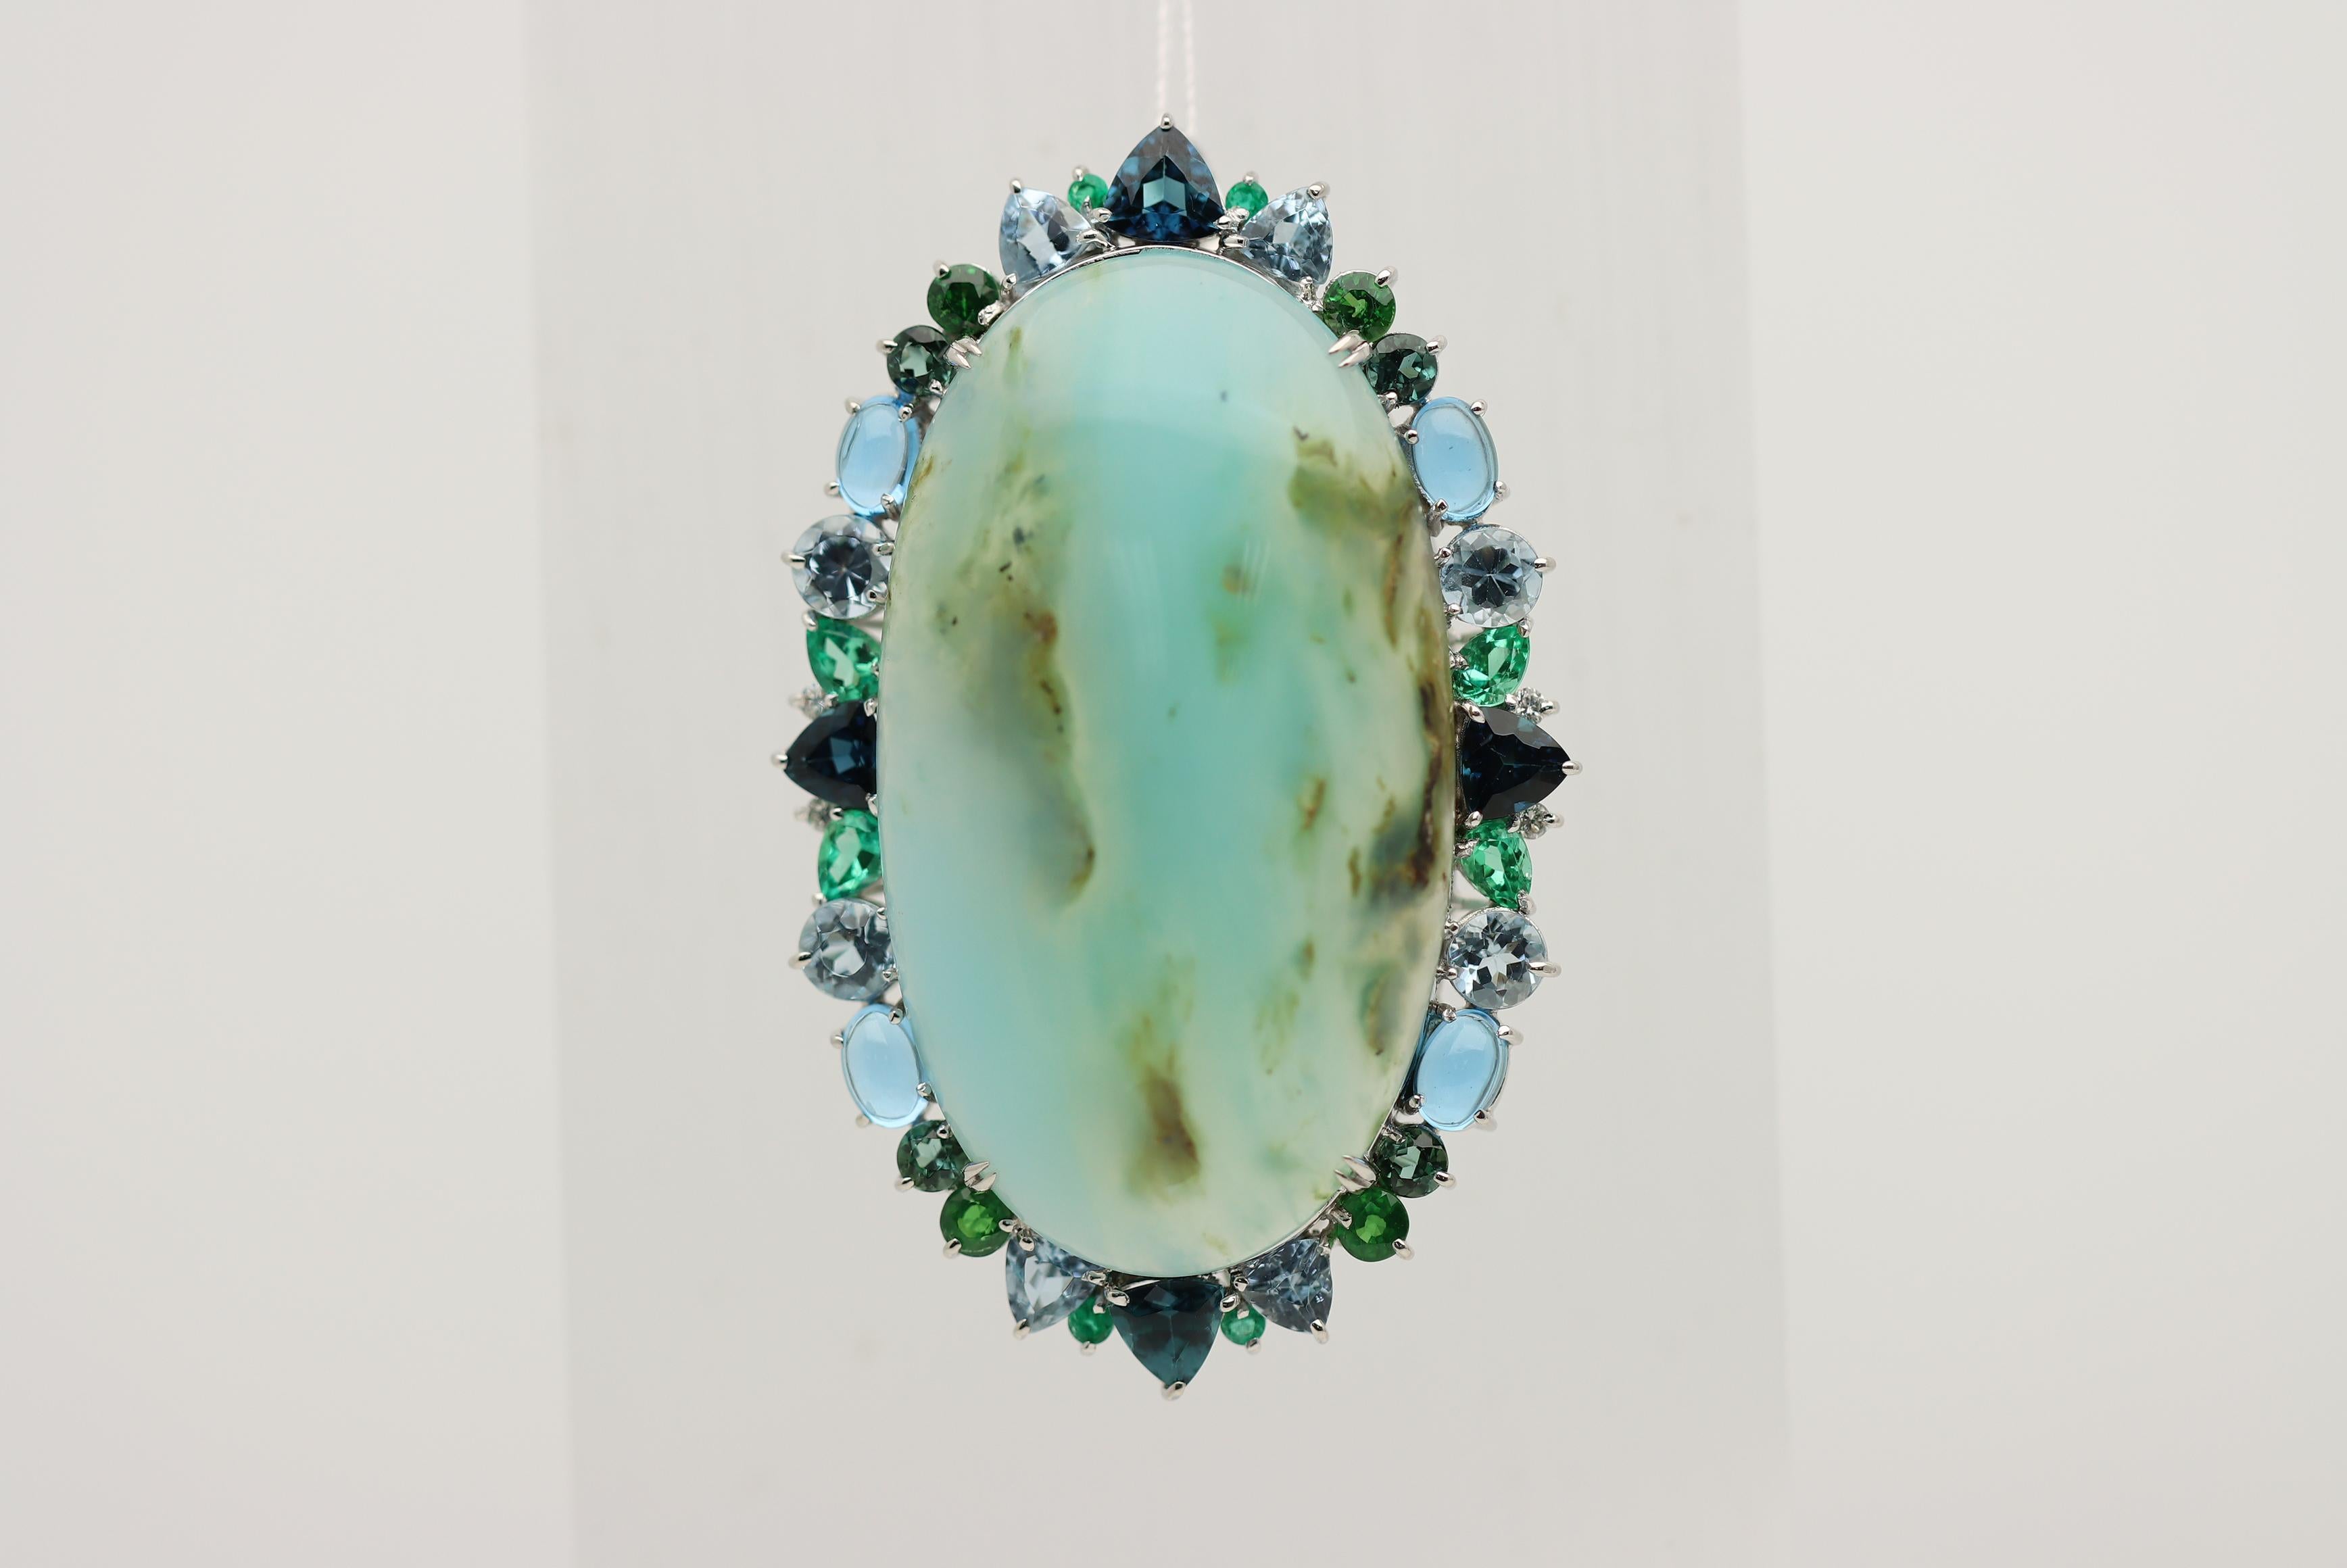 Feel empowered while wearing this regal and impressive brooch featuring a 58.81 carat natural blue opal! It has a smooth even polish over its dome along with traces of the host rock it grew with giving the stone character. It is surrounded by a